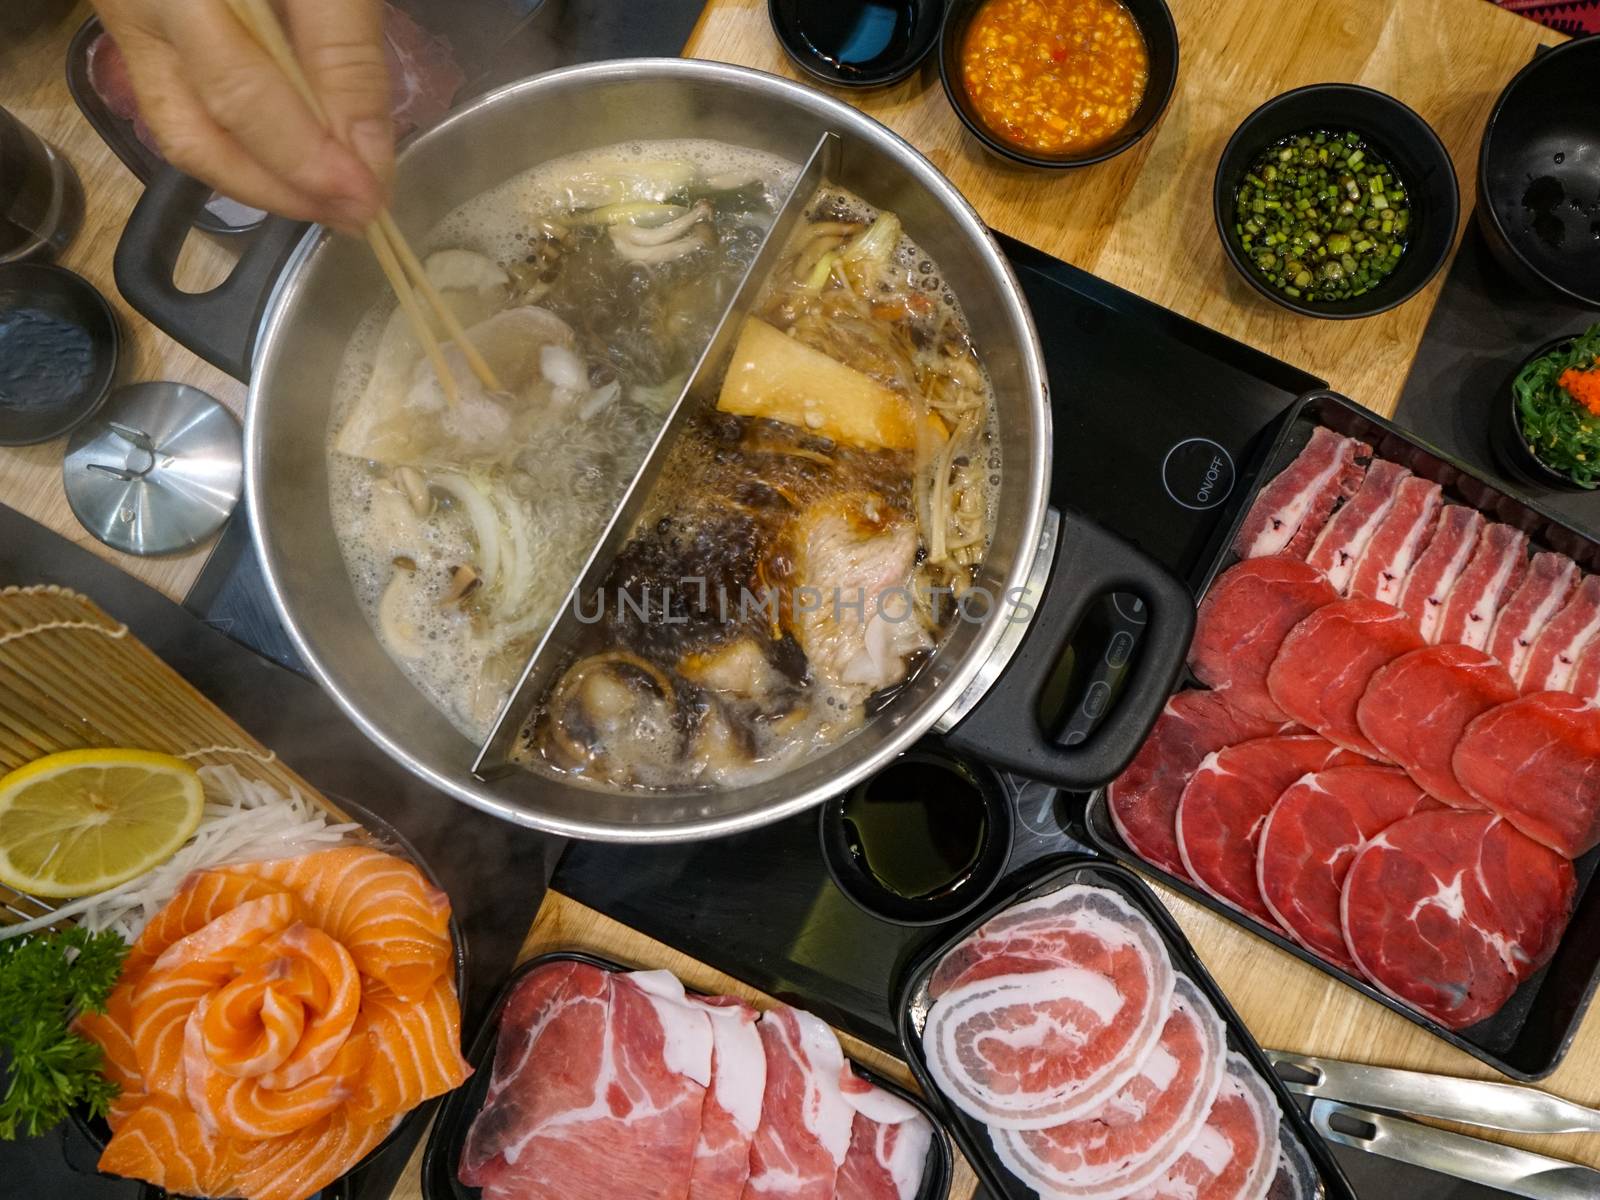 Shabu-Shabu a Japanese hotpot dish of thinly sliced meat and vegetables boiled in water. by chadchai_k